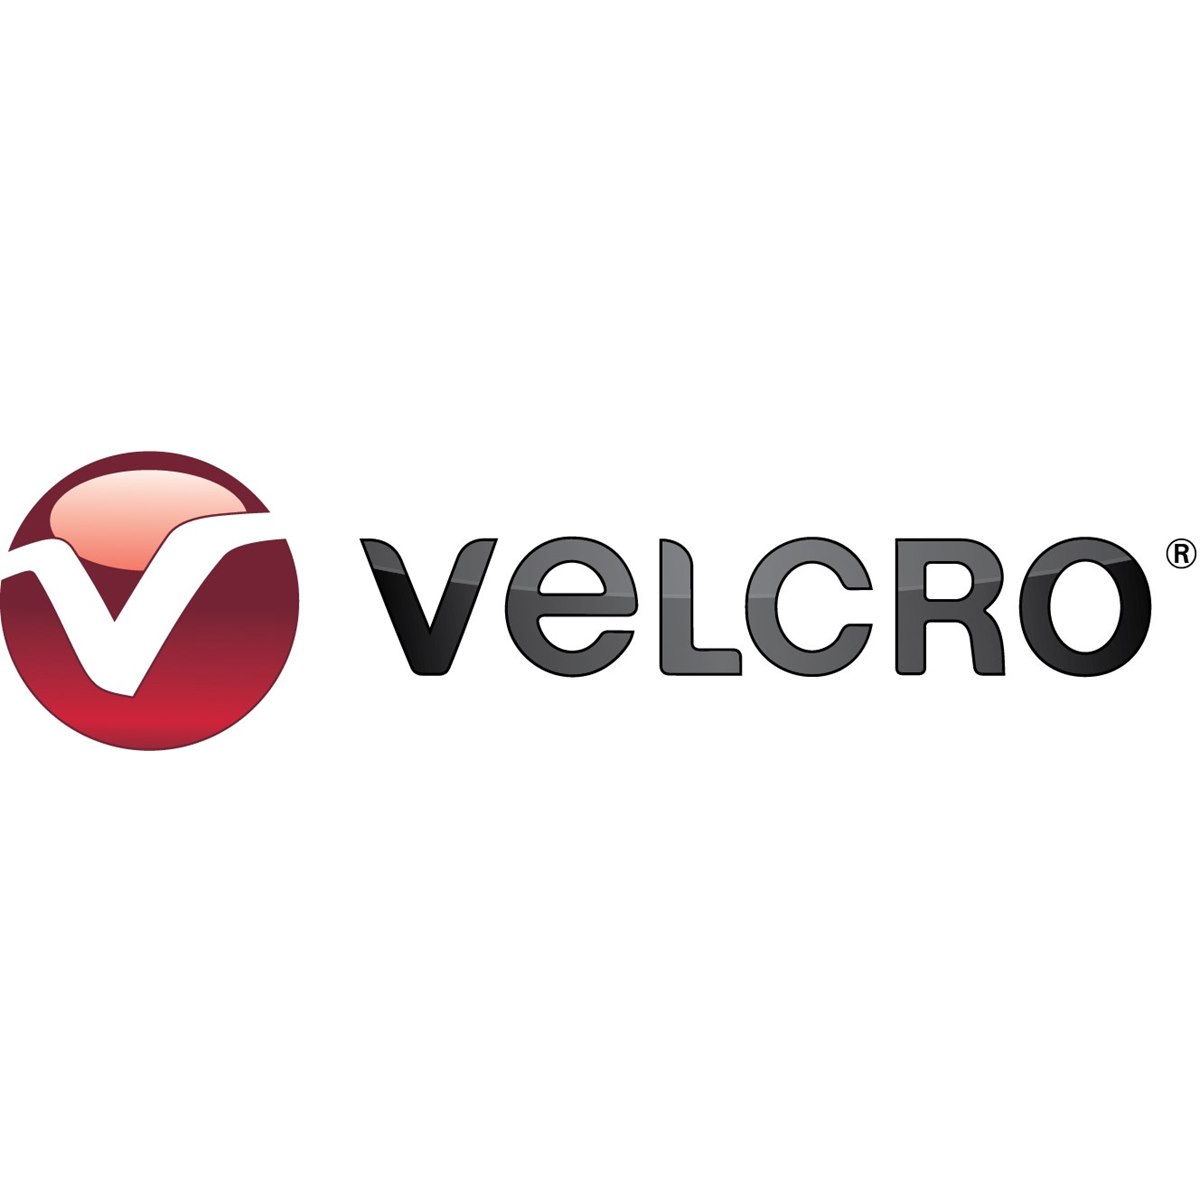 Where to Buy Velcro Products